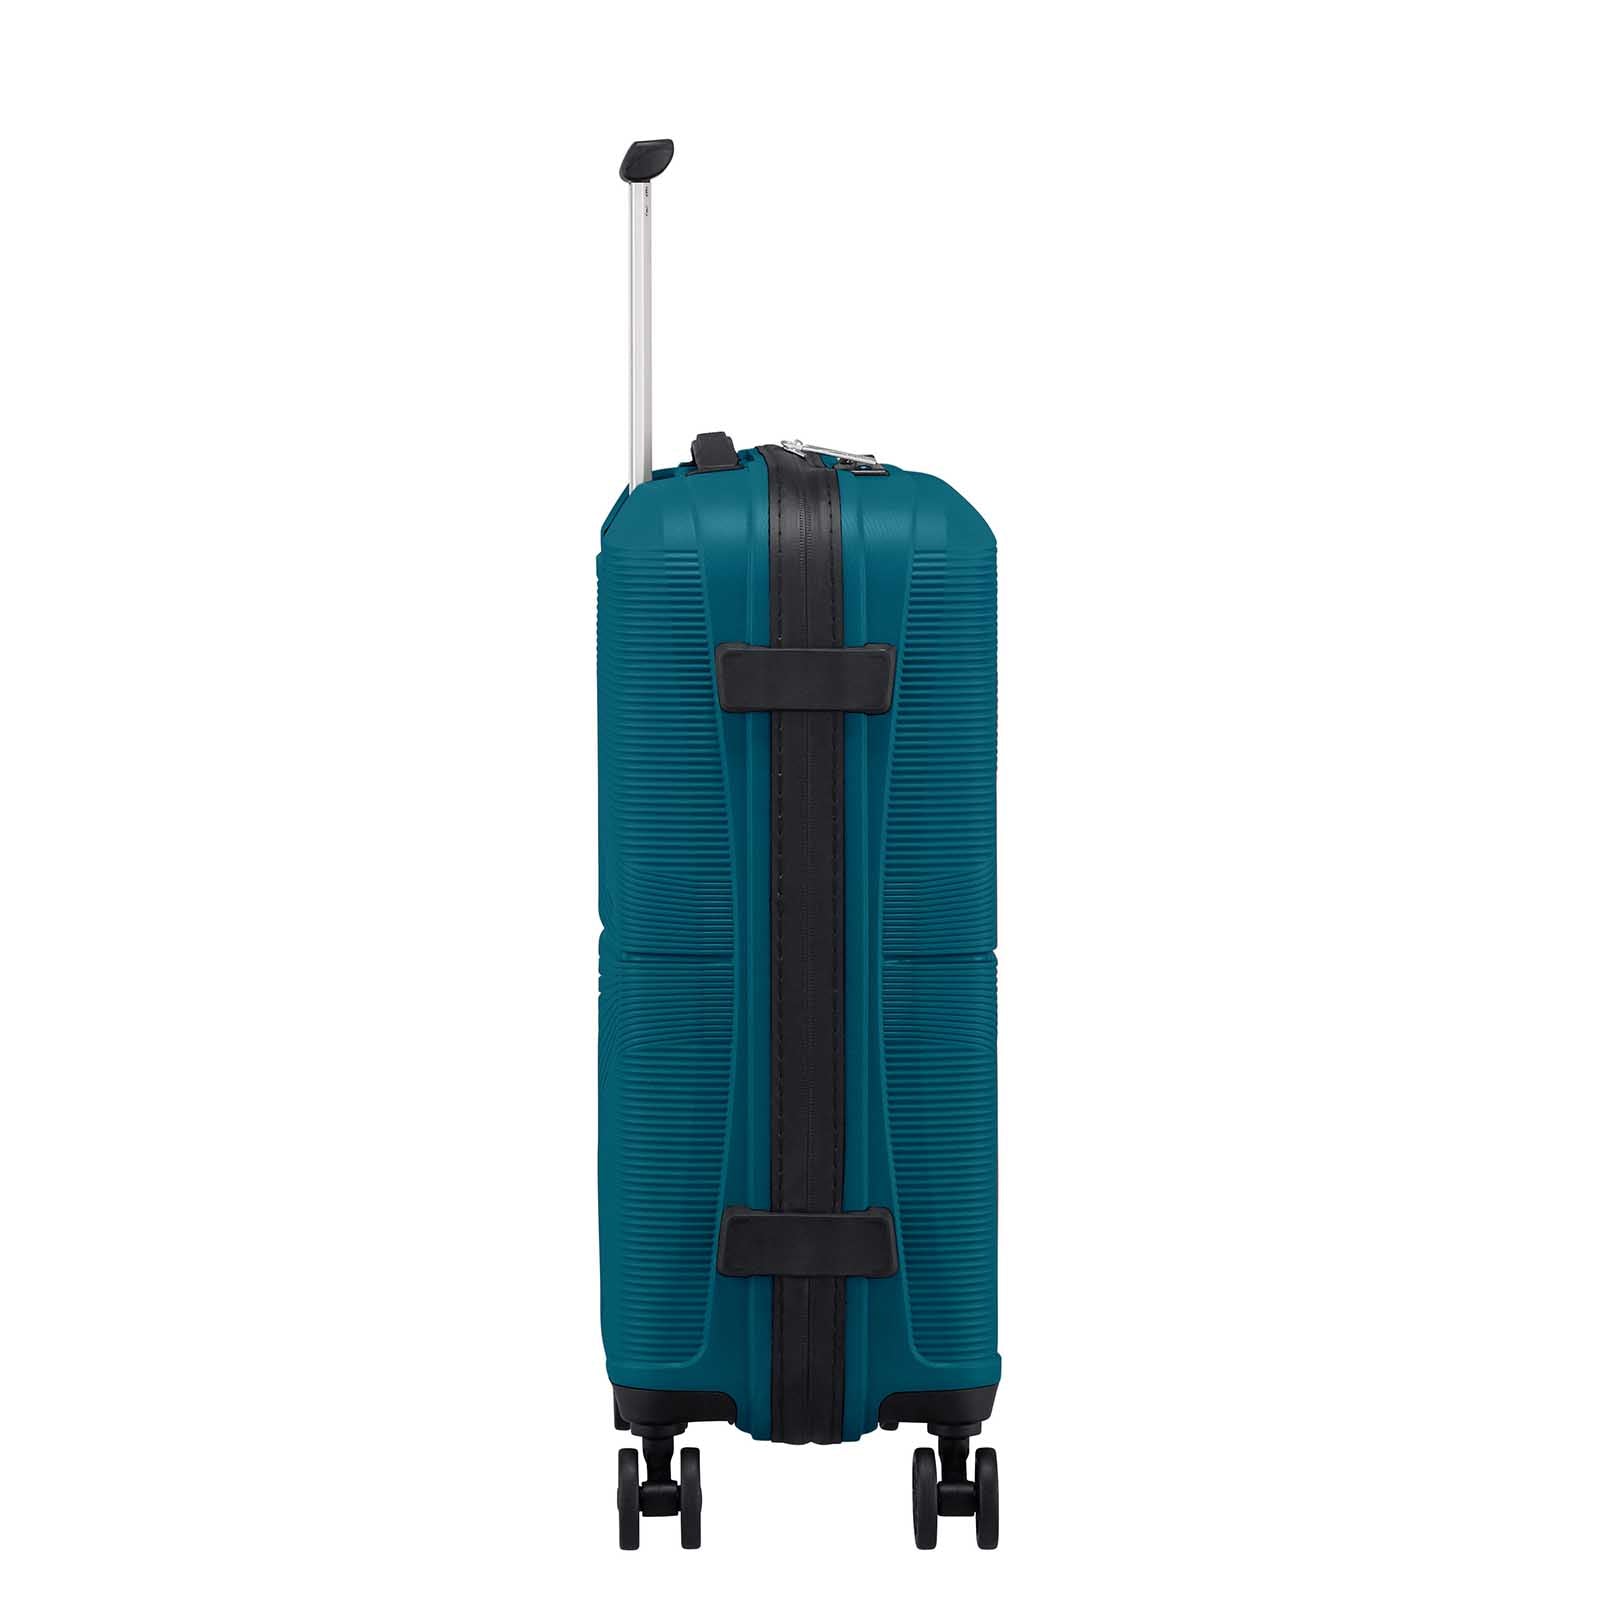 American-Tourister-Airconic-55cm-Carry-On-Suitcase-Deep-Ocean-Side-LH